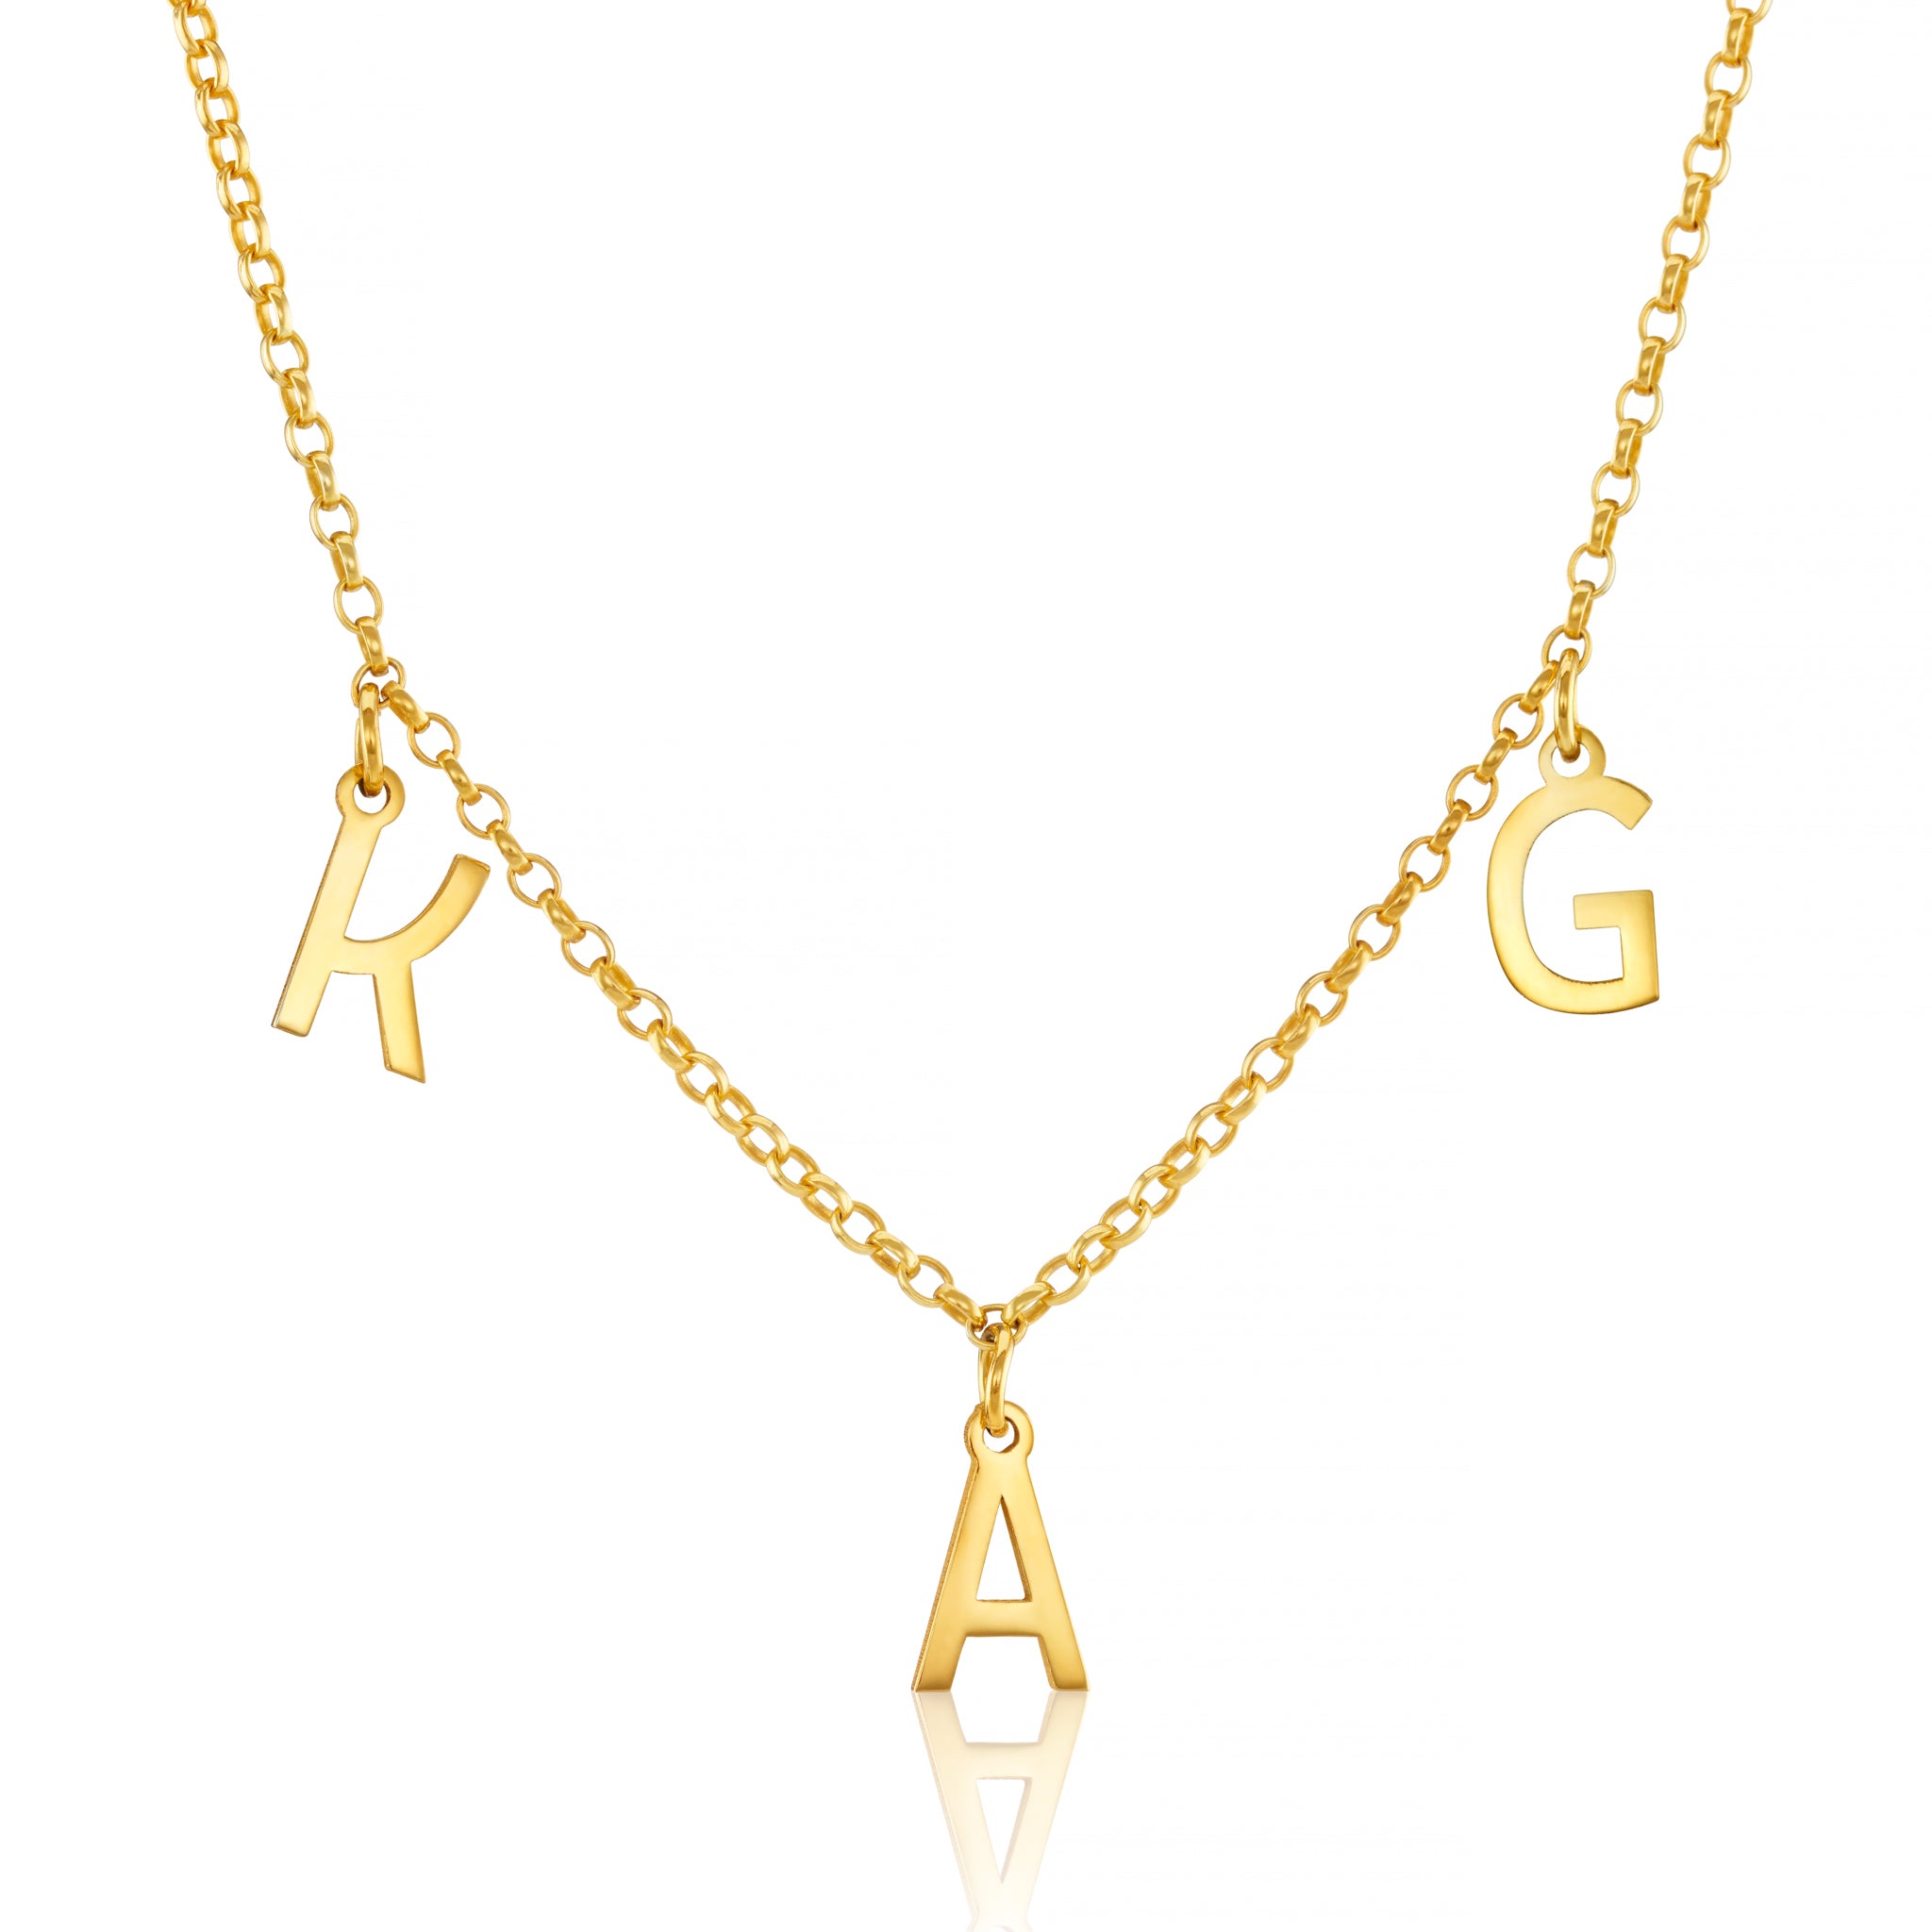 Personalised Name Choker Necklace Initial Pendant